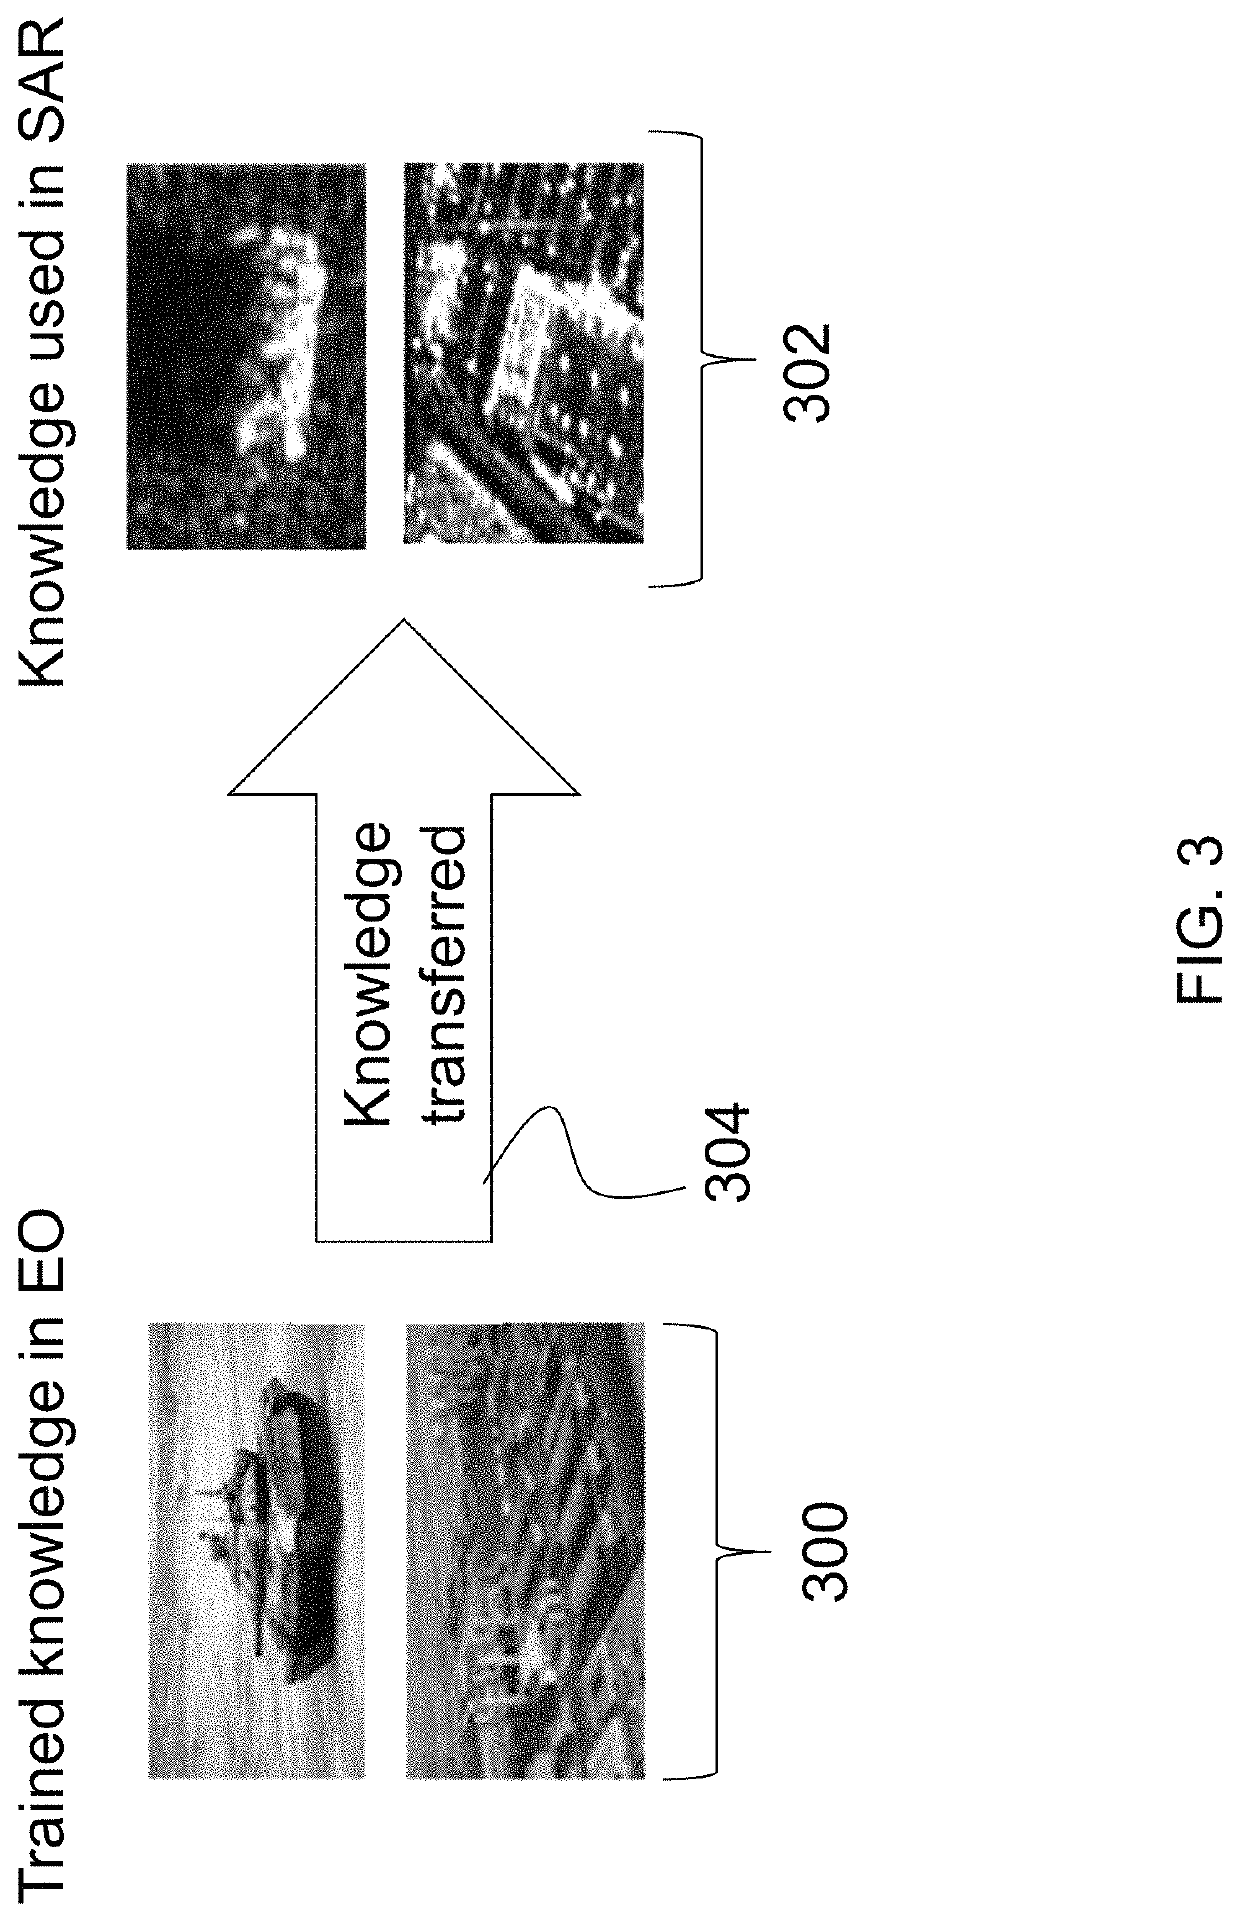 System and method for transferring electro-optical (EO) knowledge for synthetic-aperture-radar (SAR)-based object detection